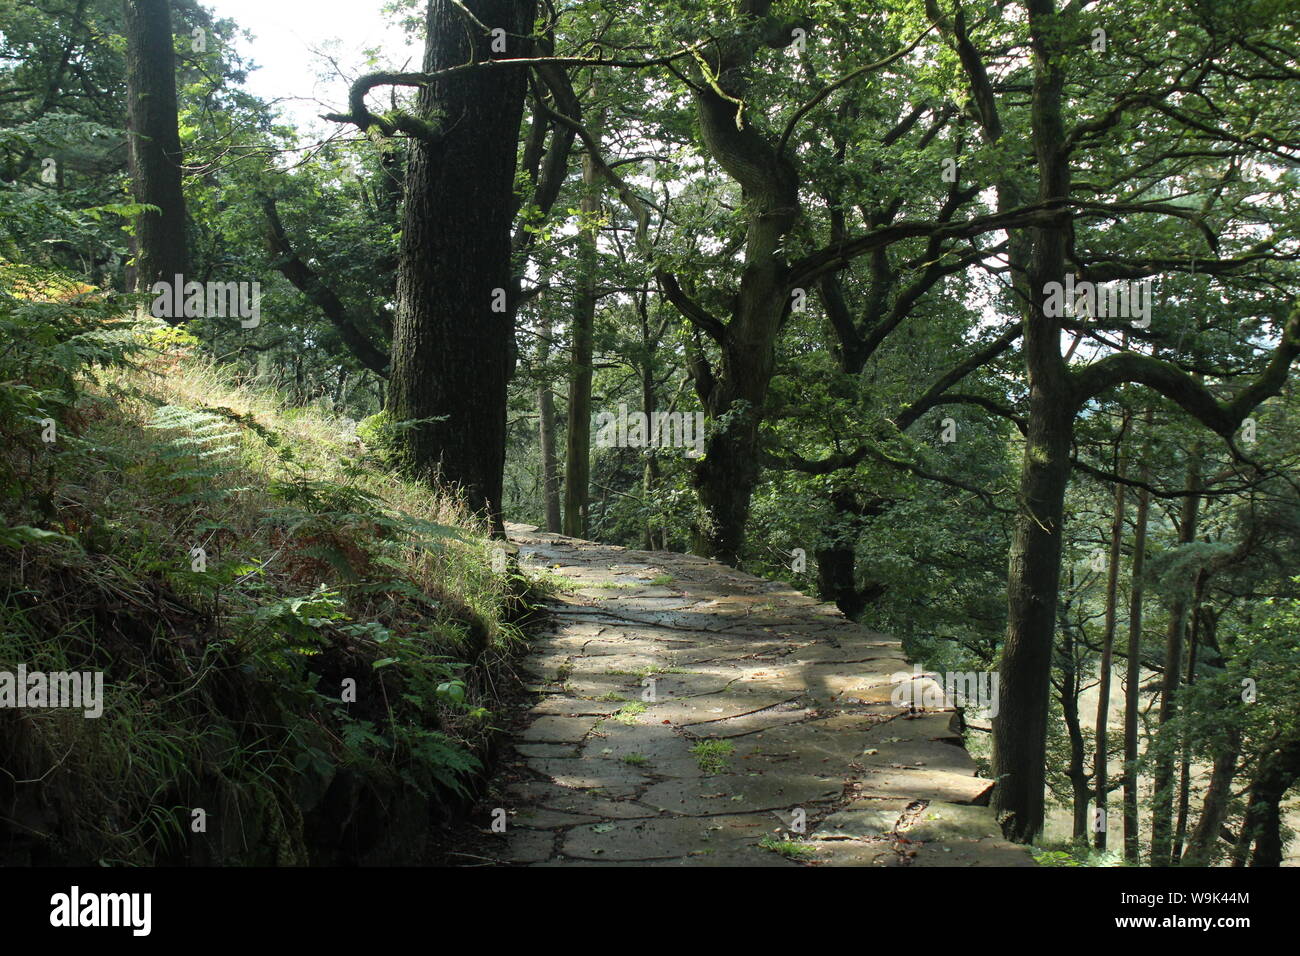 Image of a raised stone pathway through the woods, between trees and greenery in Rivington Pike Stock Photo